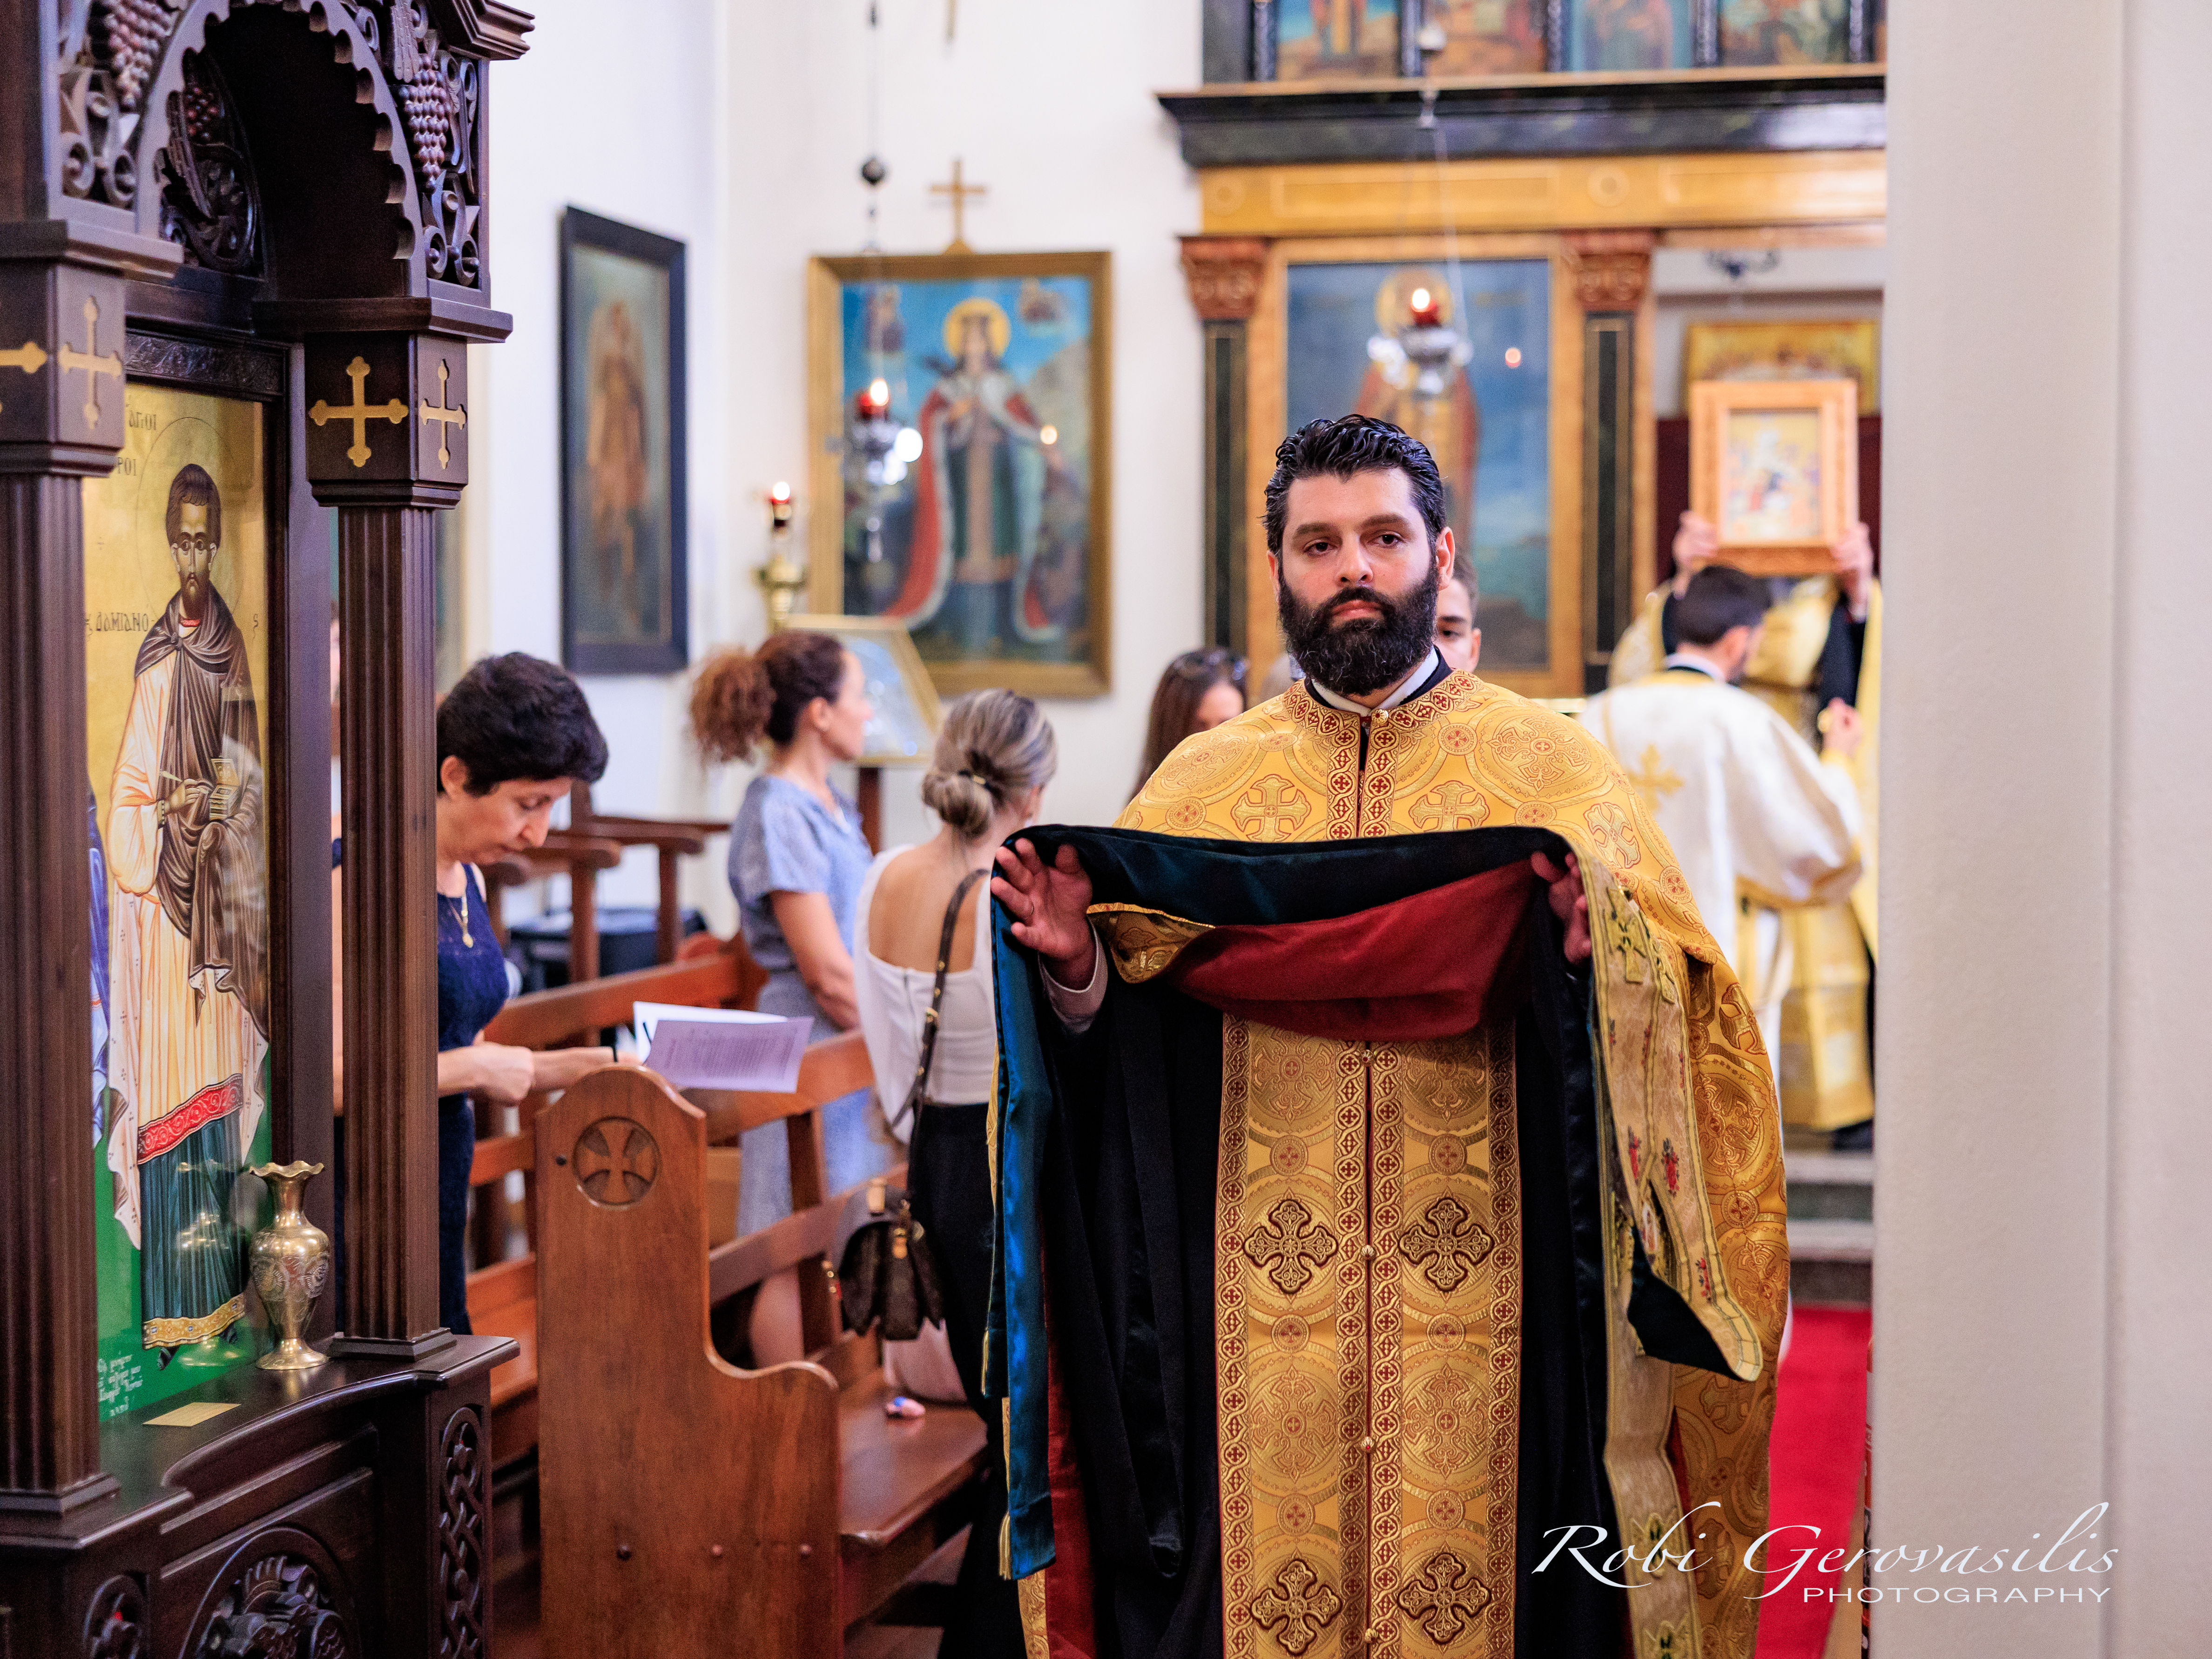 Perth: Great Vespers for the Feast of the Nativity of Christ